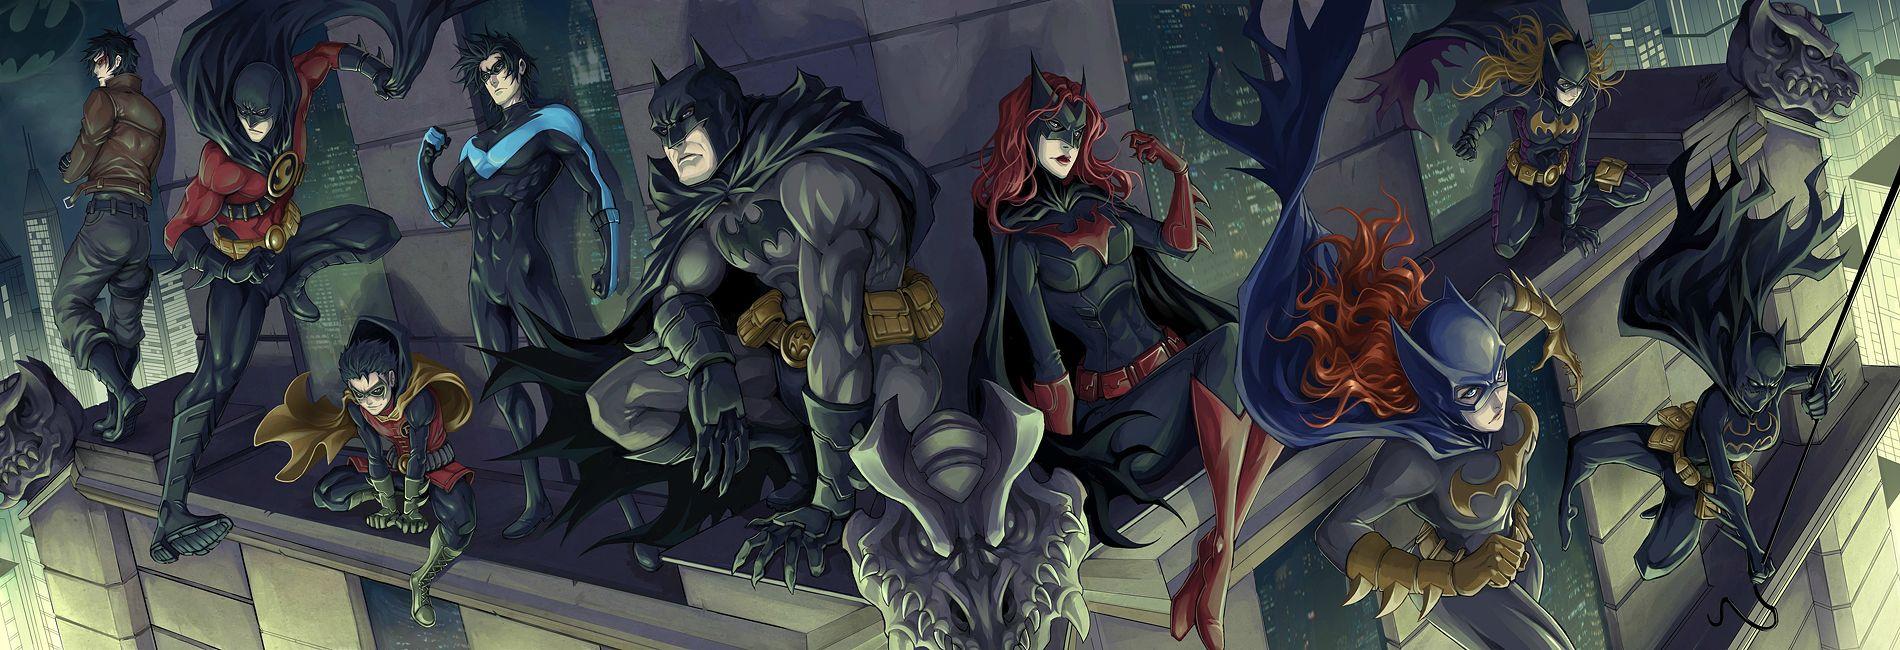 Quite possibly the most badass family in fiction!? batman